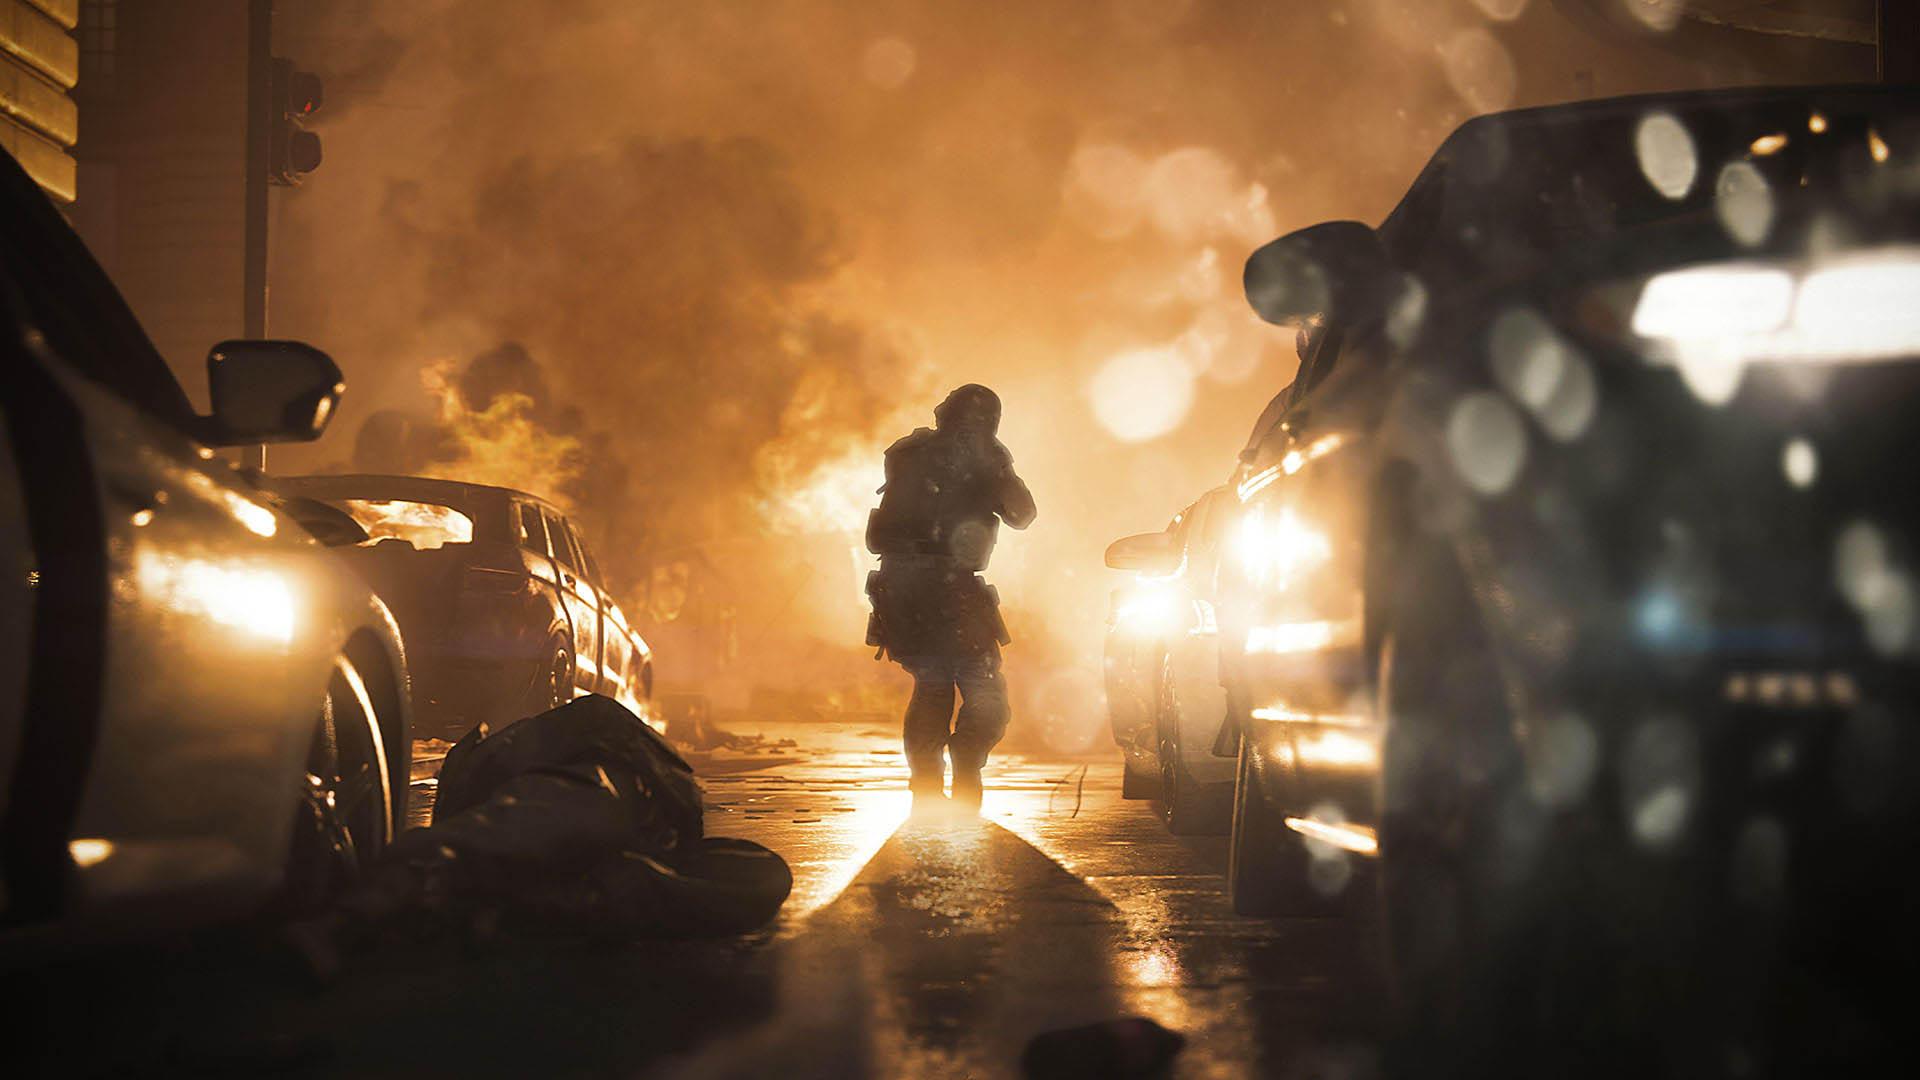 Call of Duty: Modern Warfare requirements and specs